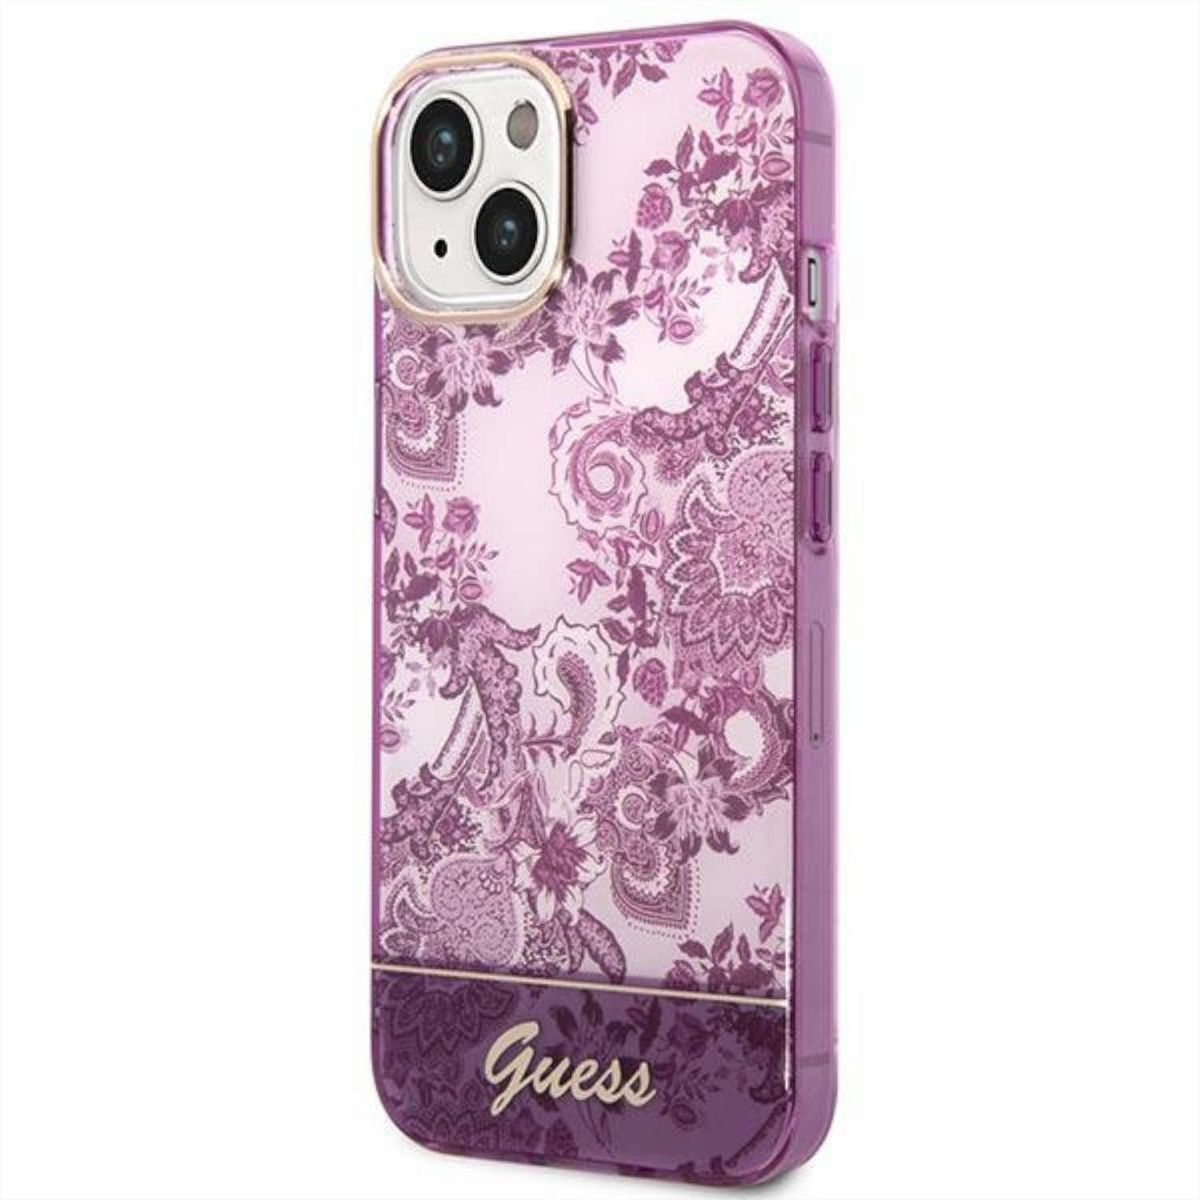 GUESS Design Muster TPU Apple, Backcover, 14, Lila PU iPhone Hülle, Leder / / PC